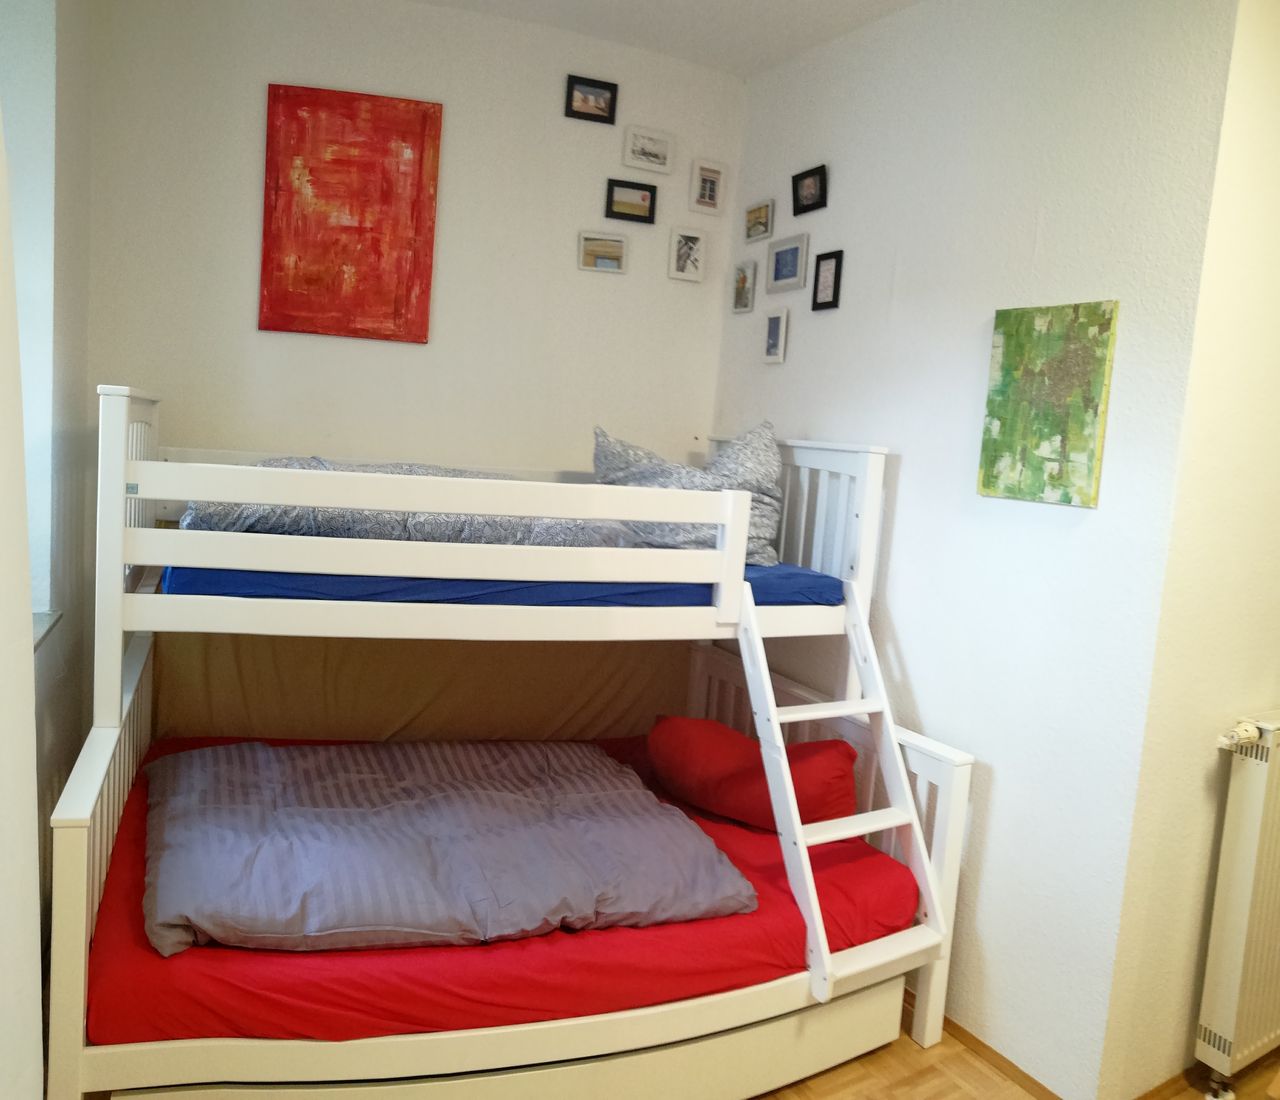 Lovingly furnished apartment in the east of Leipzig